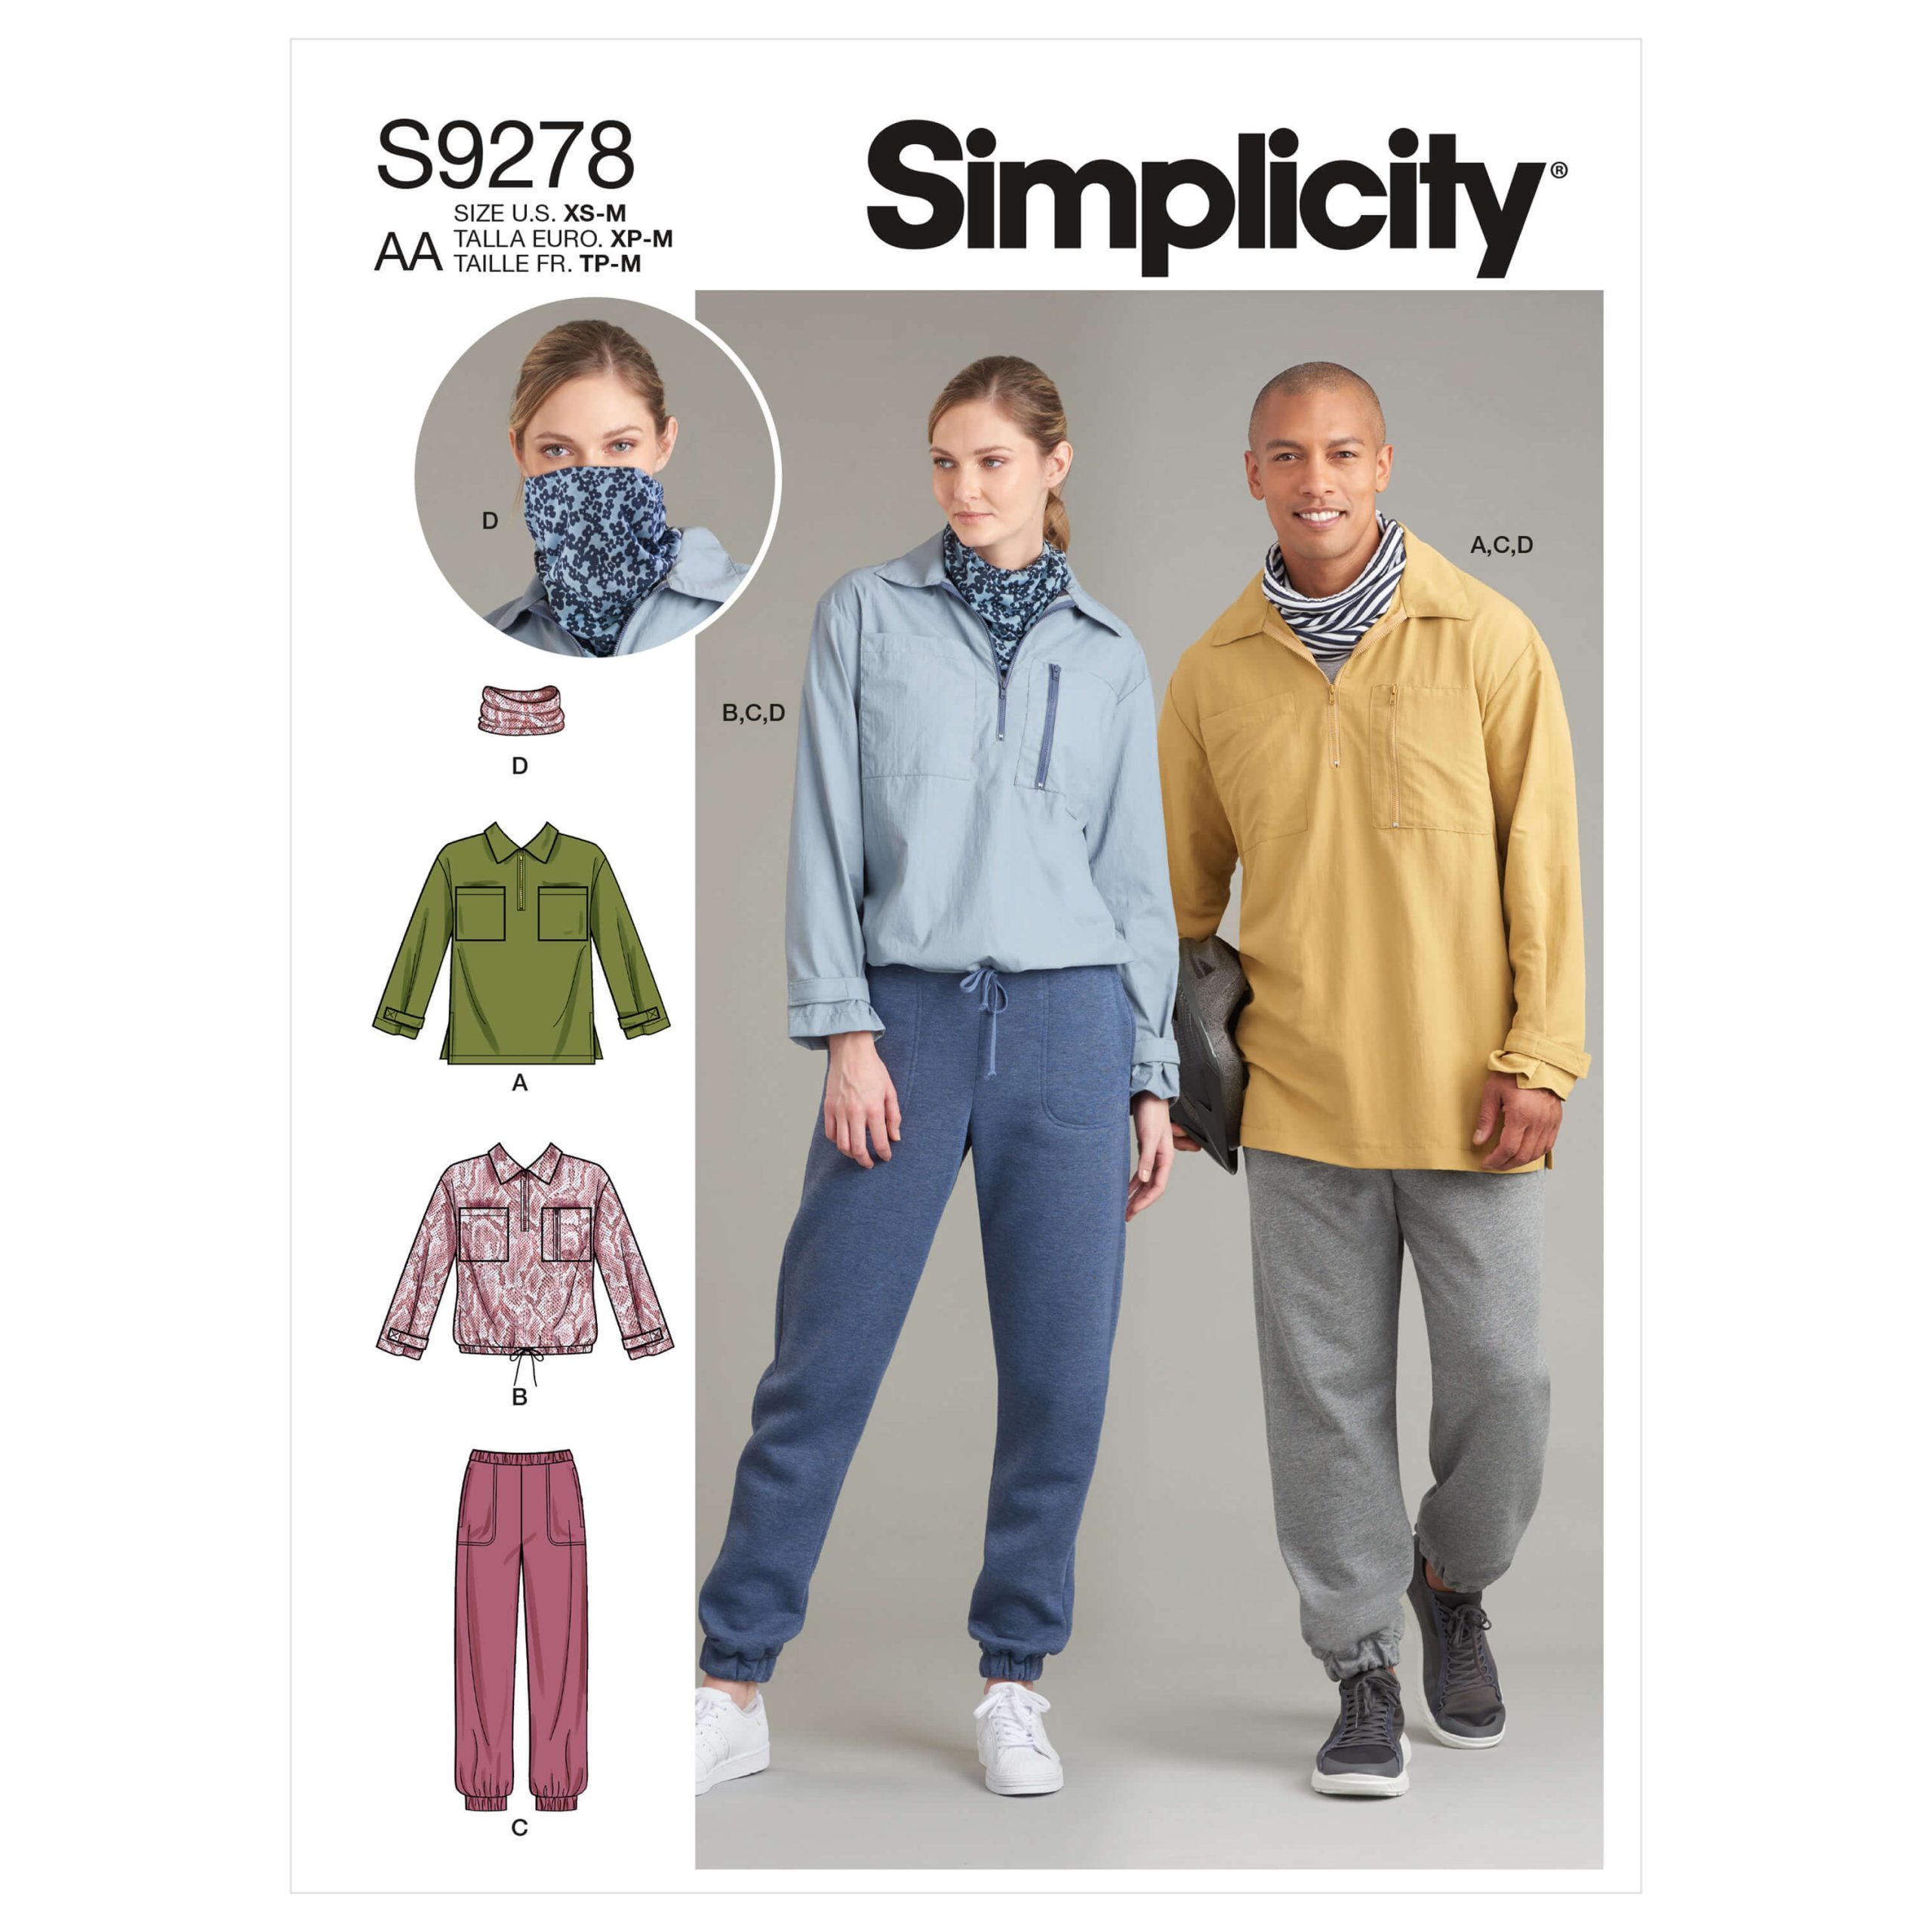 Simplicity Sewing Pattern S9278 Unisex Tops, Trousers and Snood neckpiece/mask